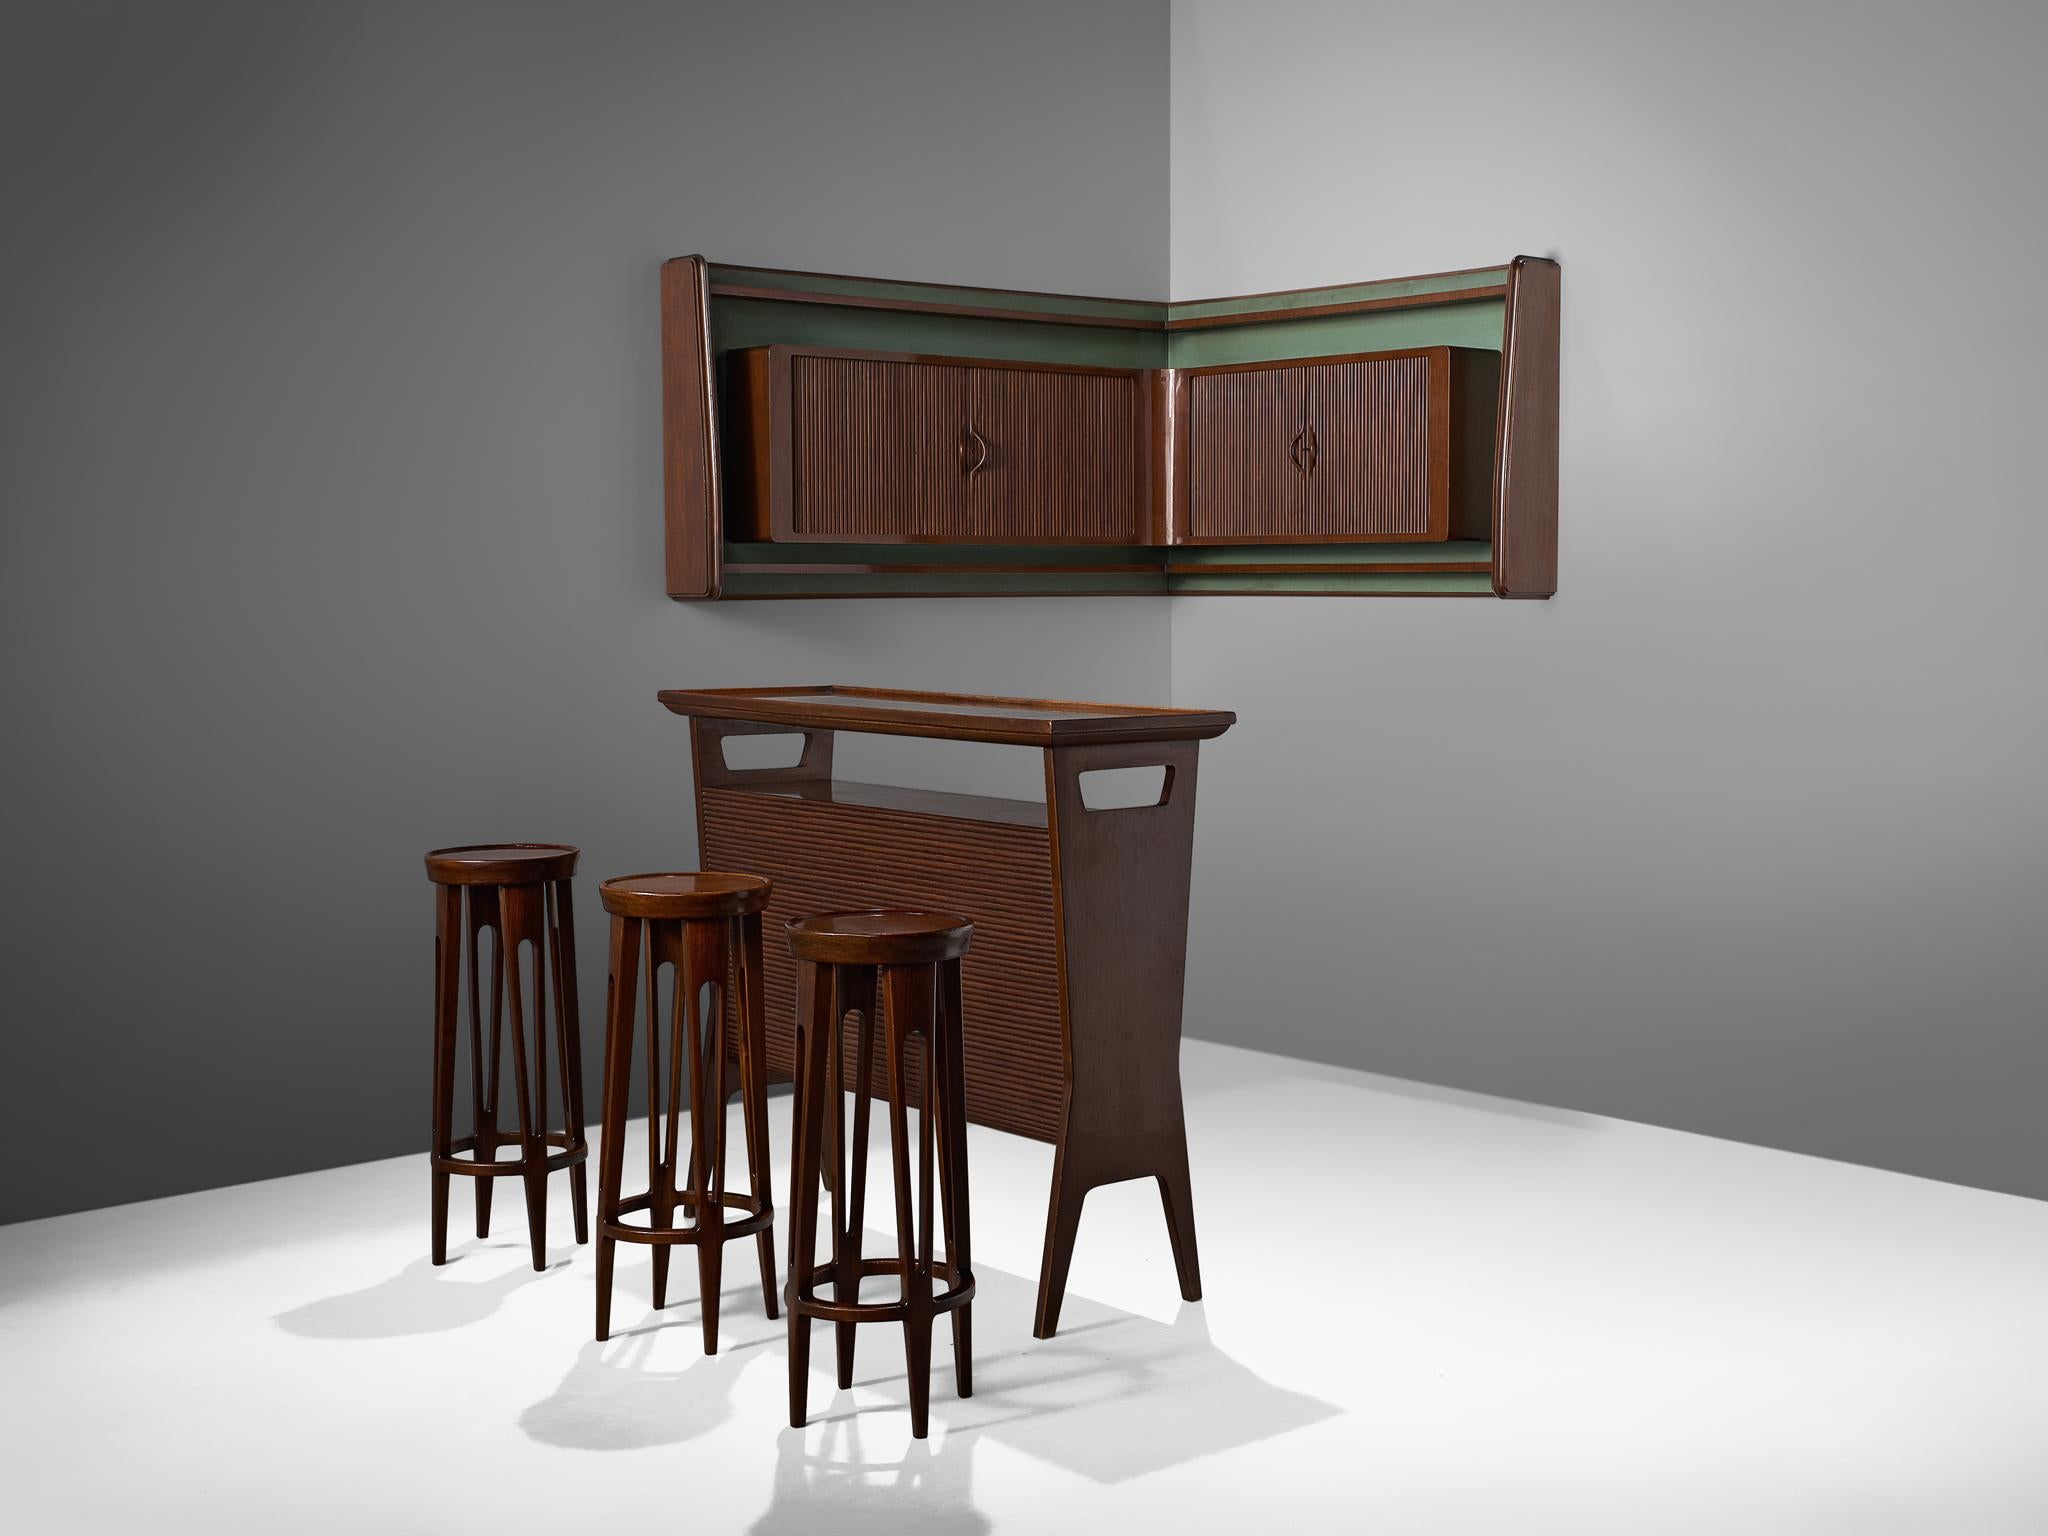 Home bar with chairs and wall unit, walnut, wood, Italy, 1950s. 

Elegant, playful private bar with matching wall unit and stools. A divine set from the heart of Italy in the vibrant 1950s. The bar and other pieces are made out of Italian walnut and